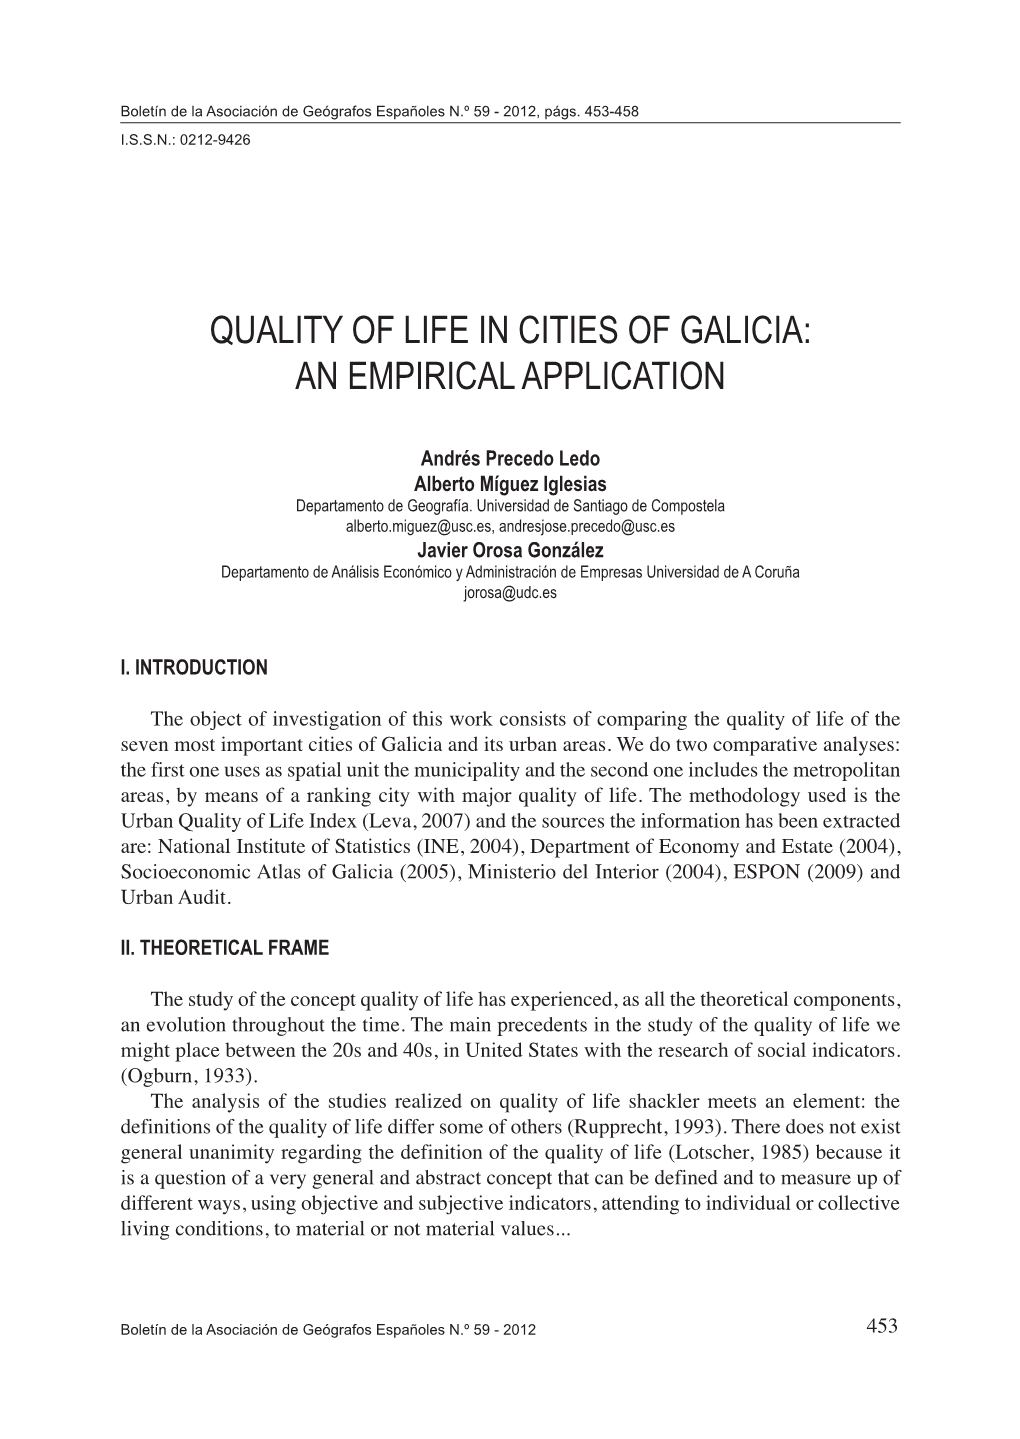 Quality of Life in Cities of Galicia: an Empirical Application